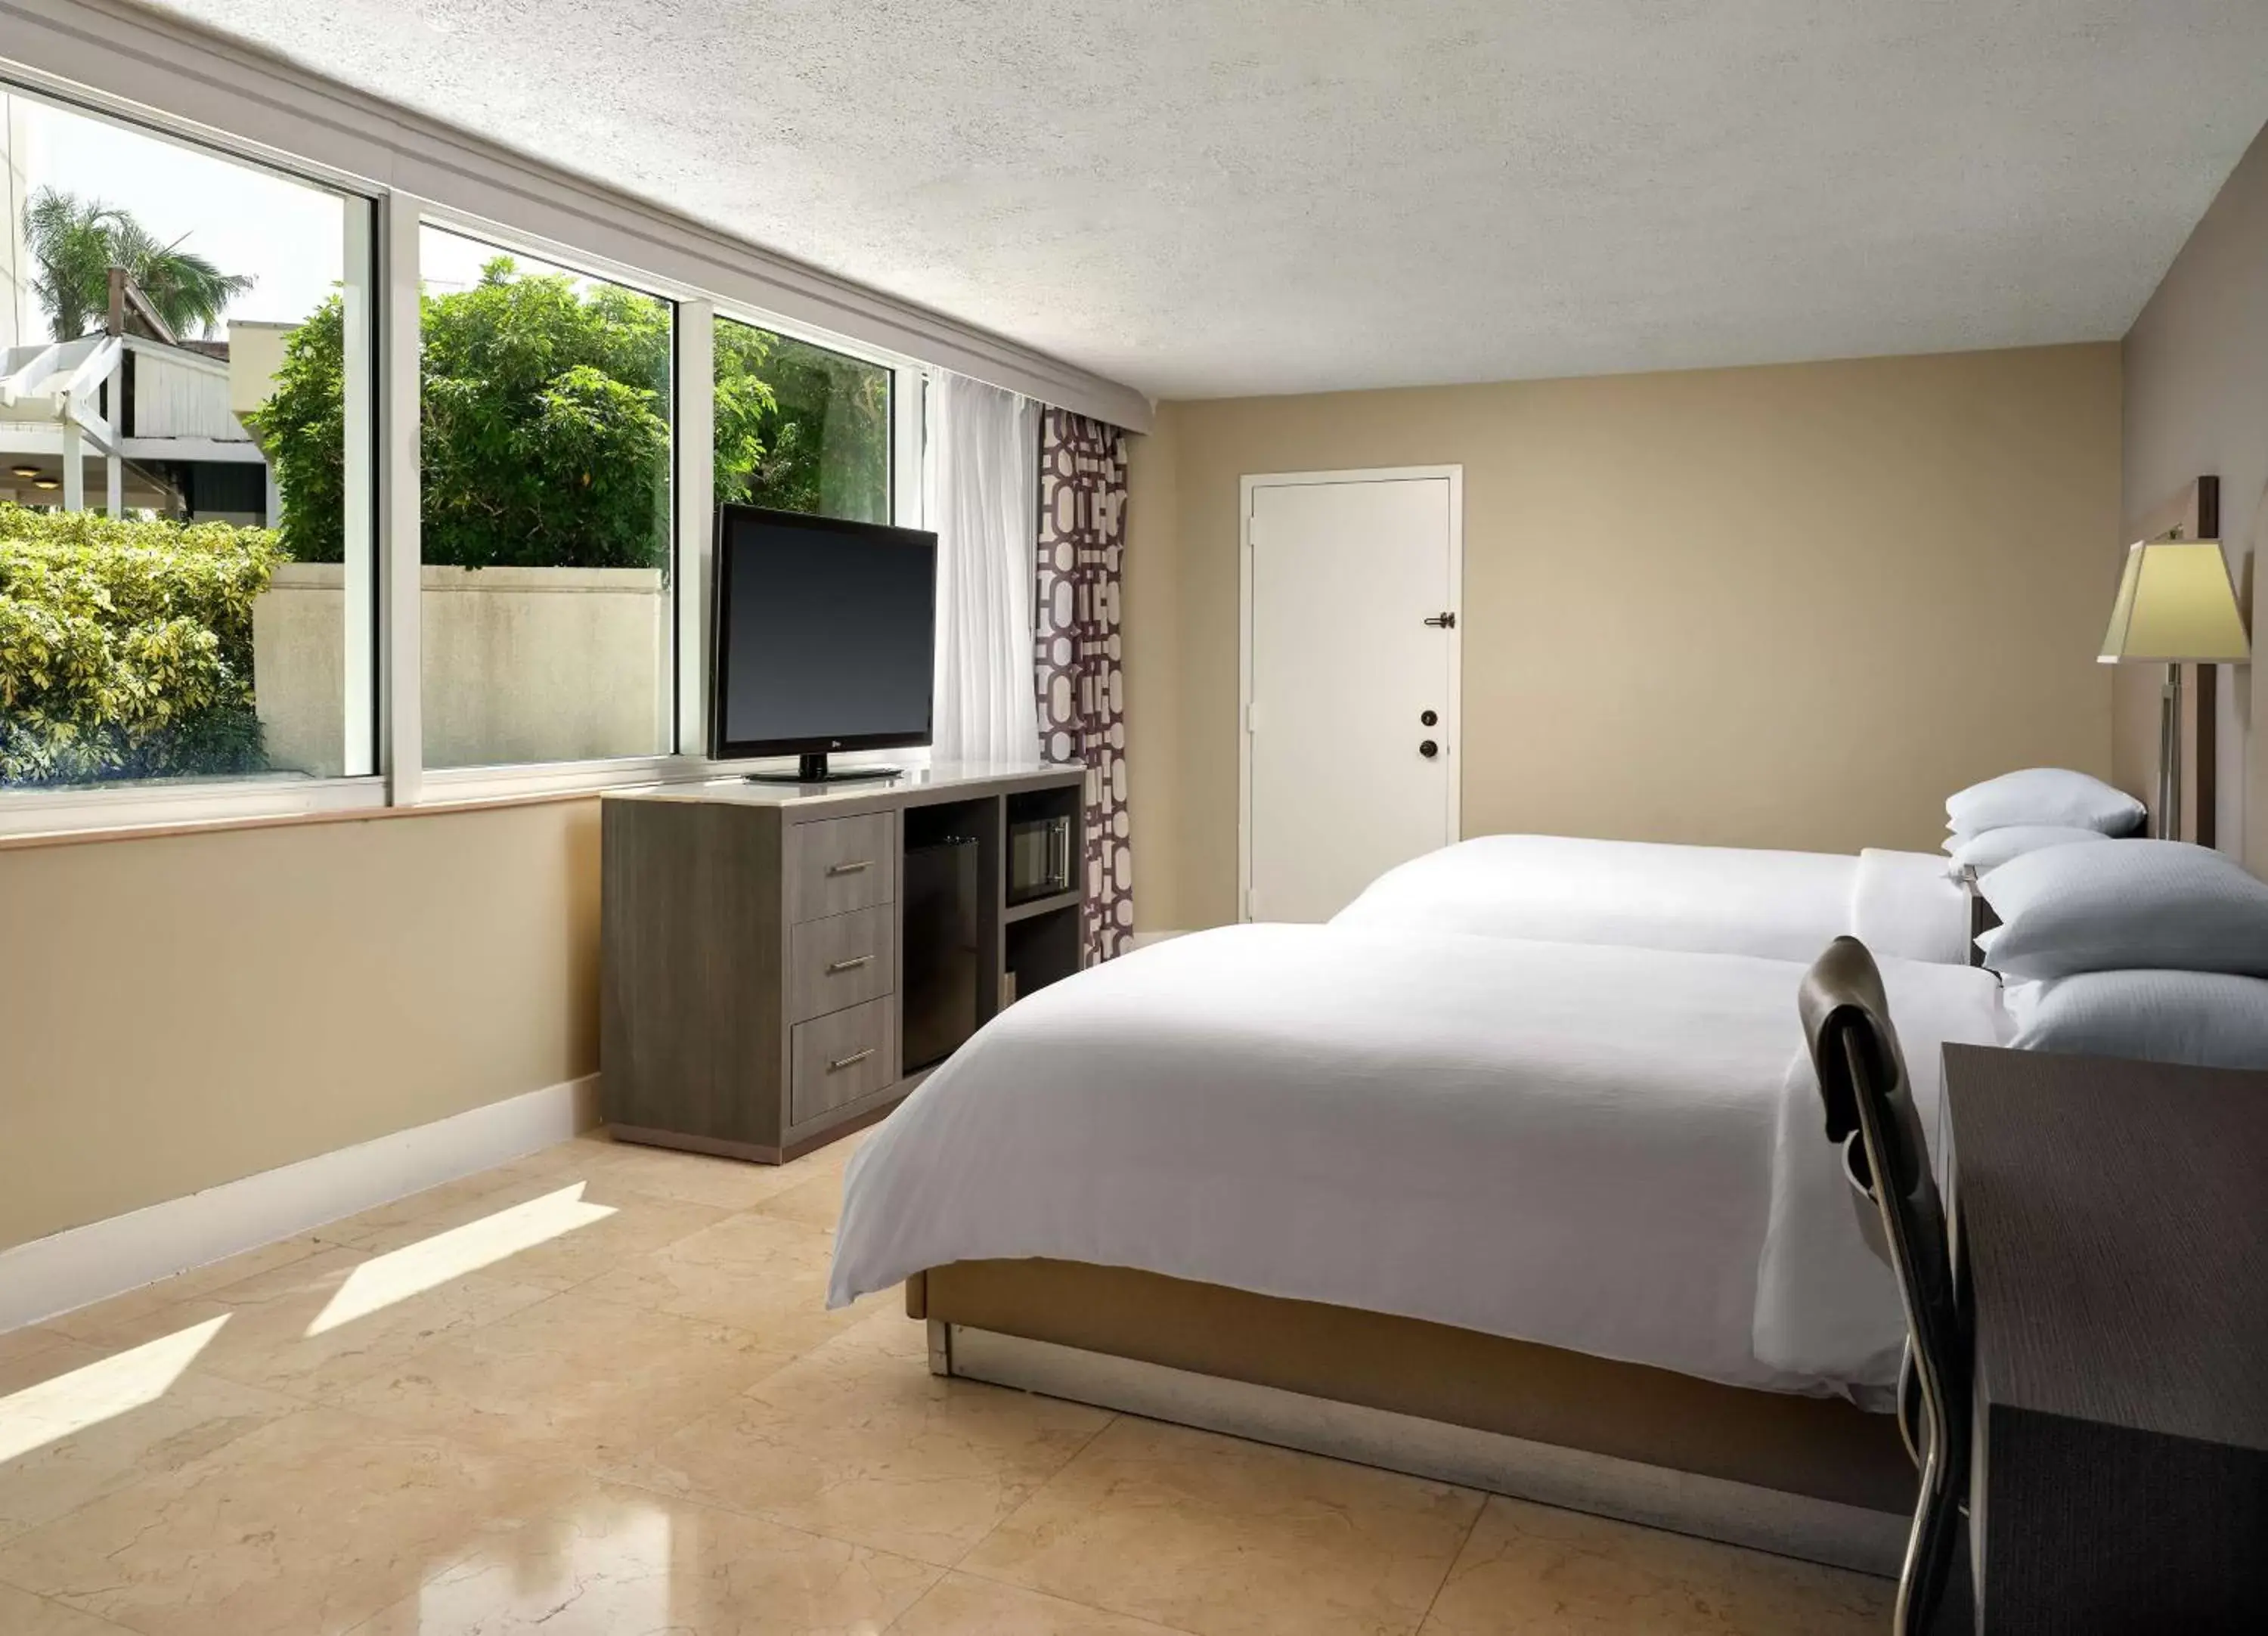 Double Room with Garden View in DoubleTree by Hilton Grand Hotel Biscayne Bay